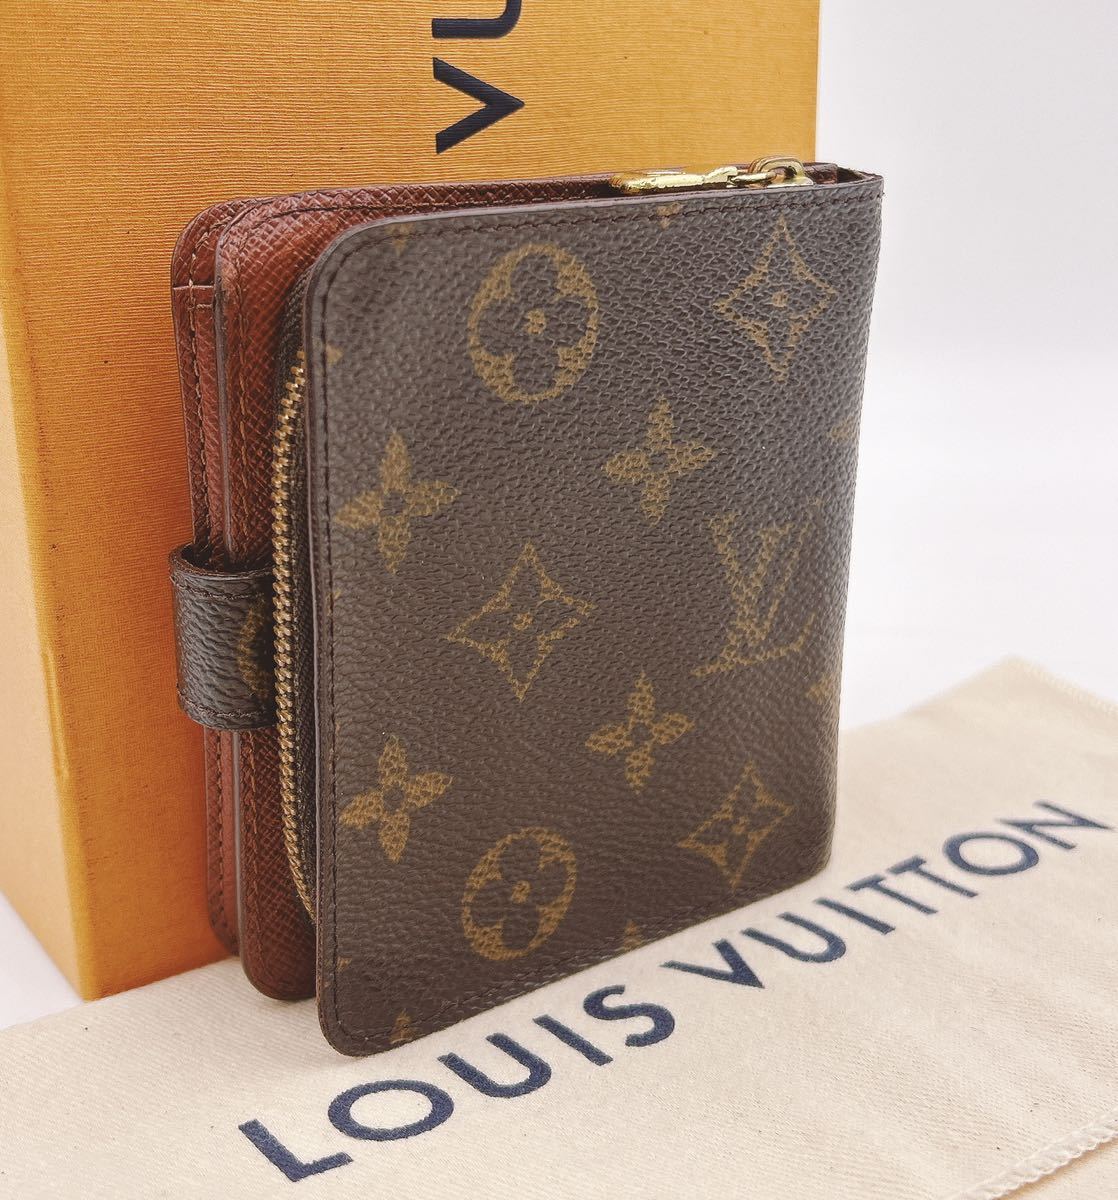 A23518☆正規品☆ LOUIS VUITTON ルイヴィトン モノグラム コンパクト